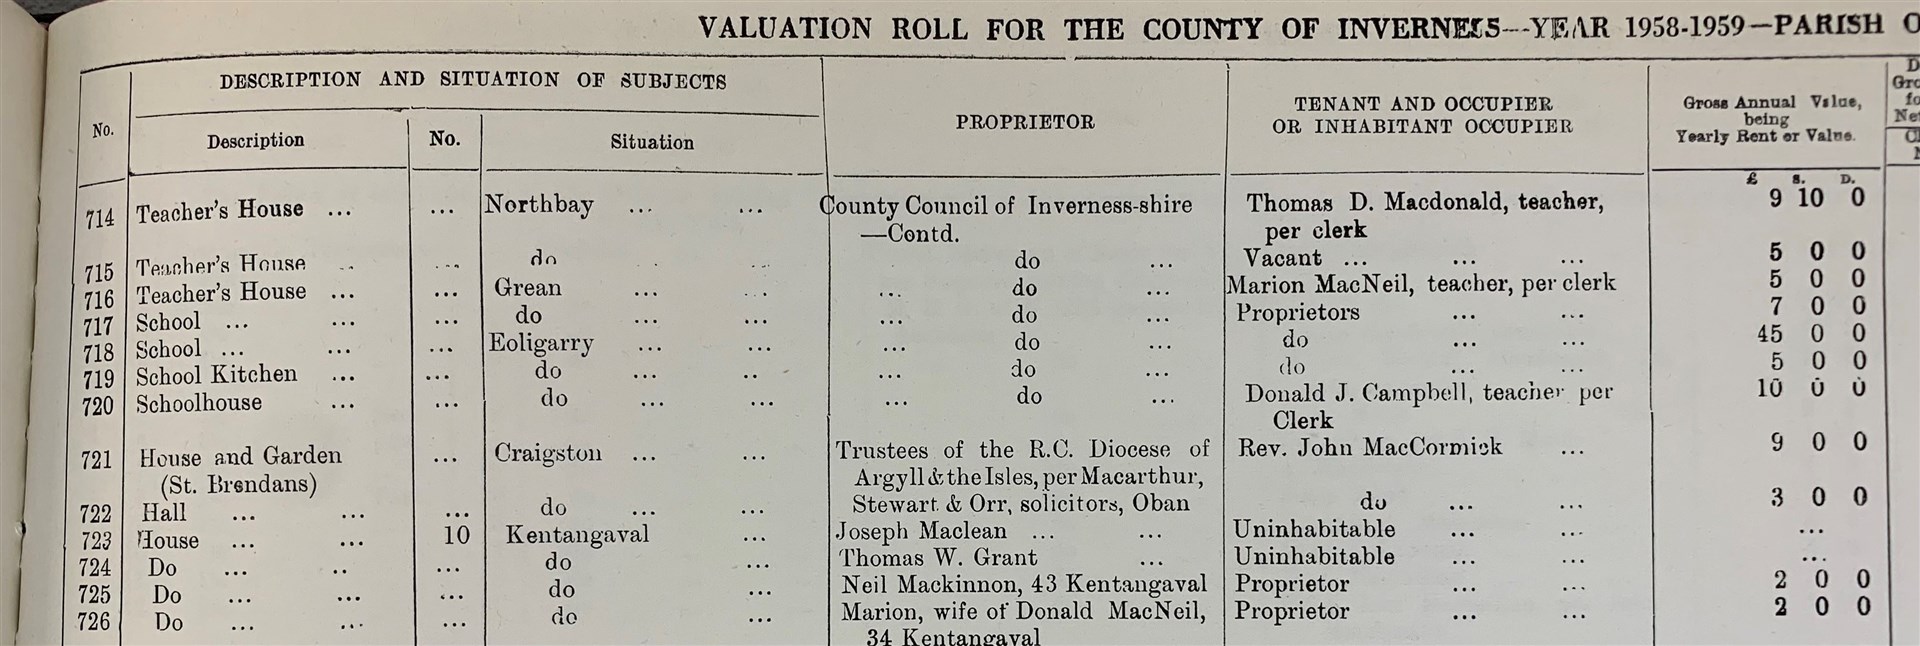 1958-59 County of Inverness Valuation Roll showing Thomas D. Macdonald as the occupier of the Teacher’s House in Northbay, Barra.